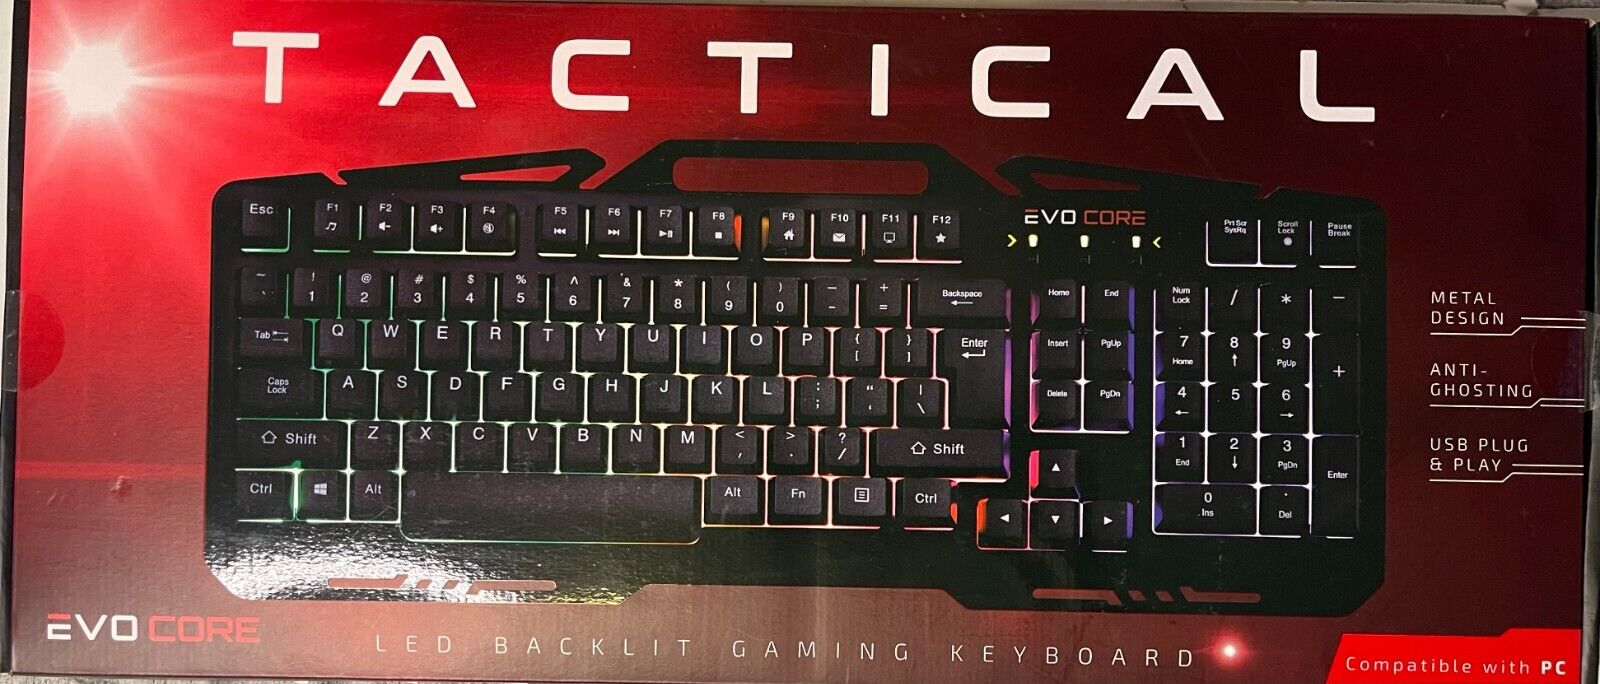 Tactical LED Backlit Gaming Keyboard by Evo Core Preowned In Box For PC